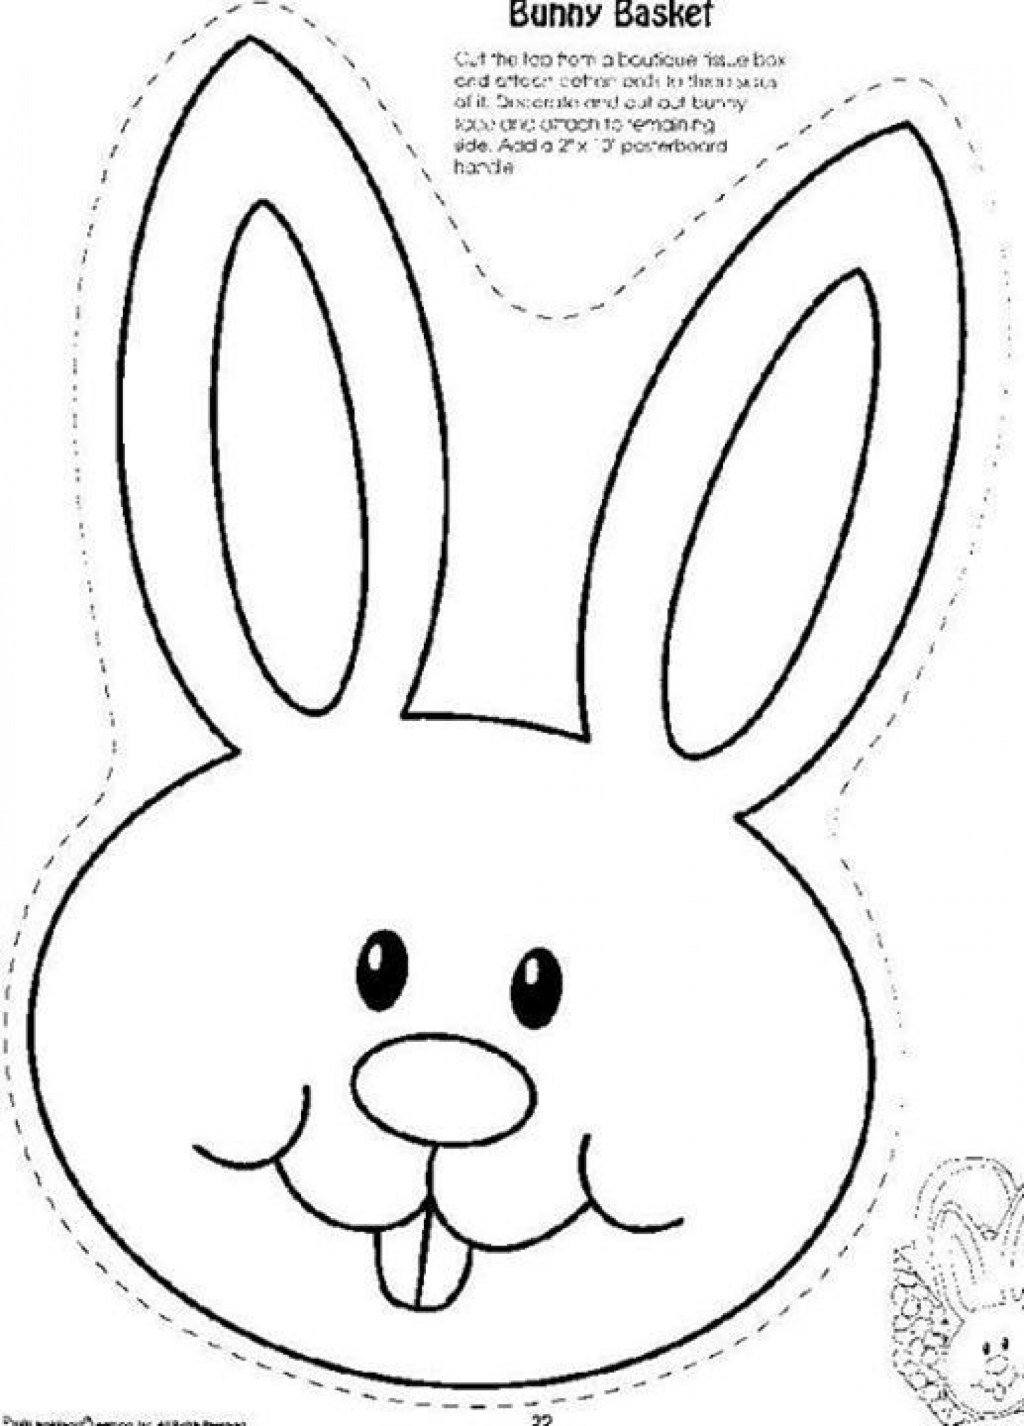 Coloring pages on x easter bunny face coloring pages to print httpstcobzsrrgom httpstcohmwzyb x